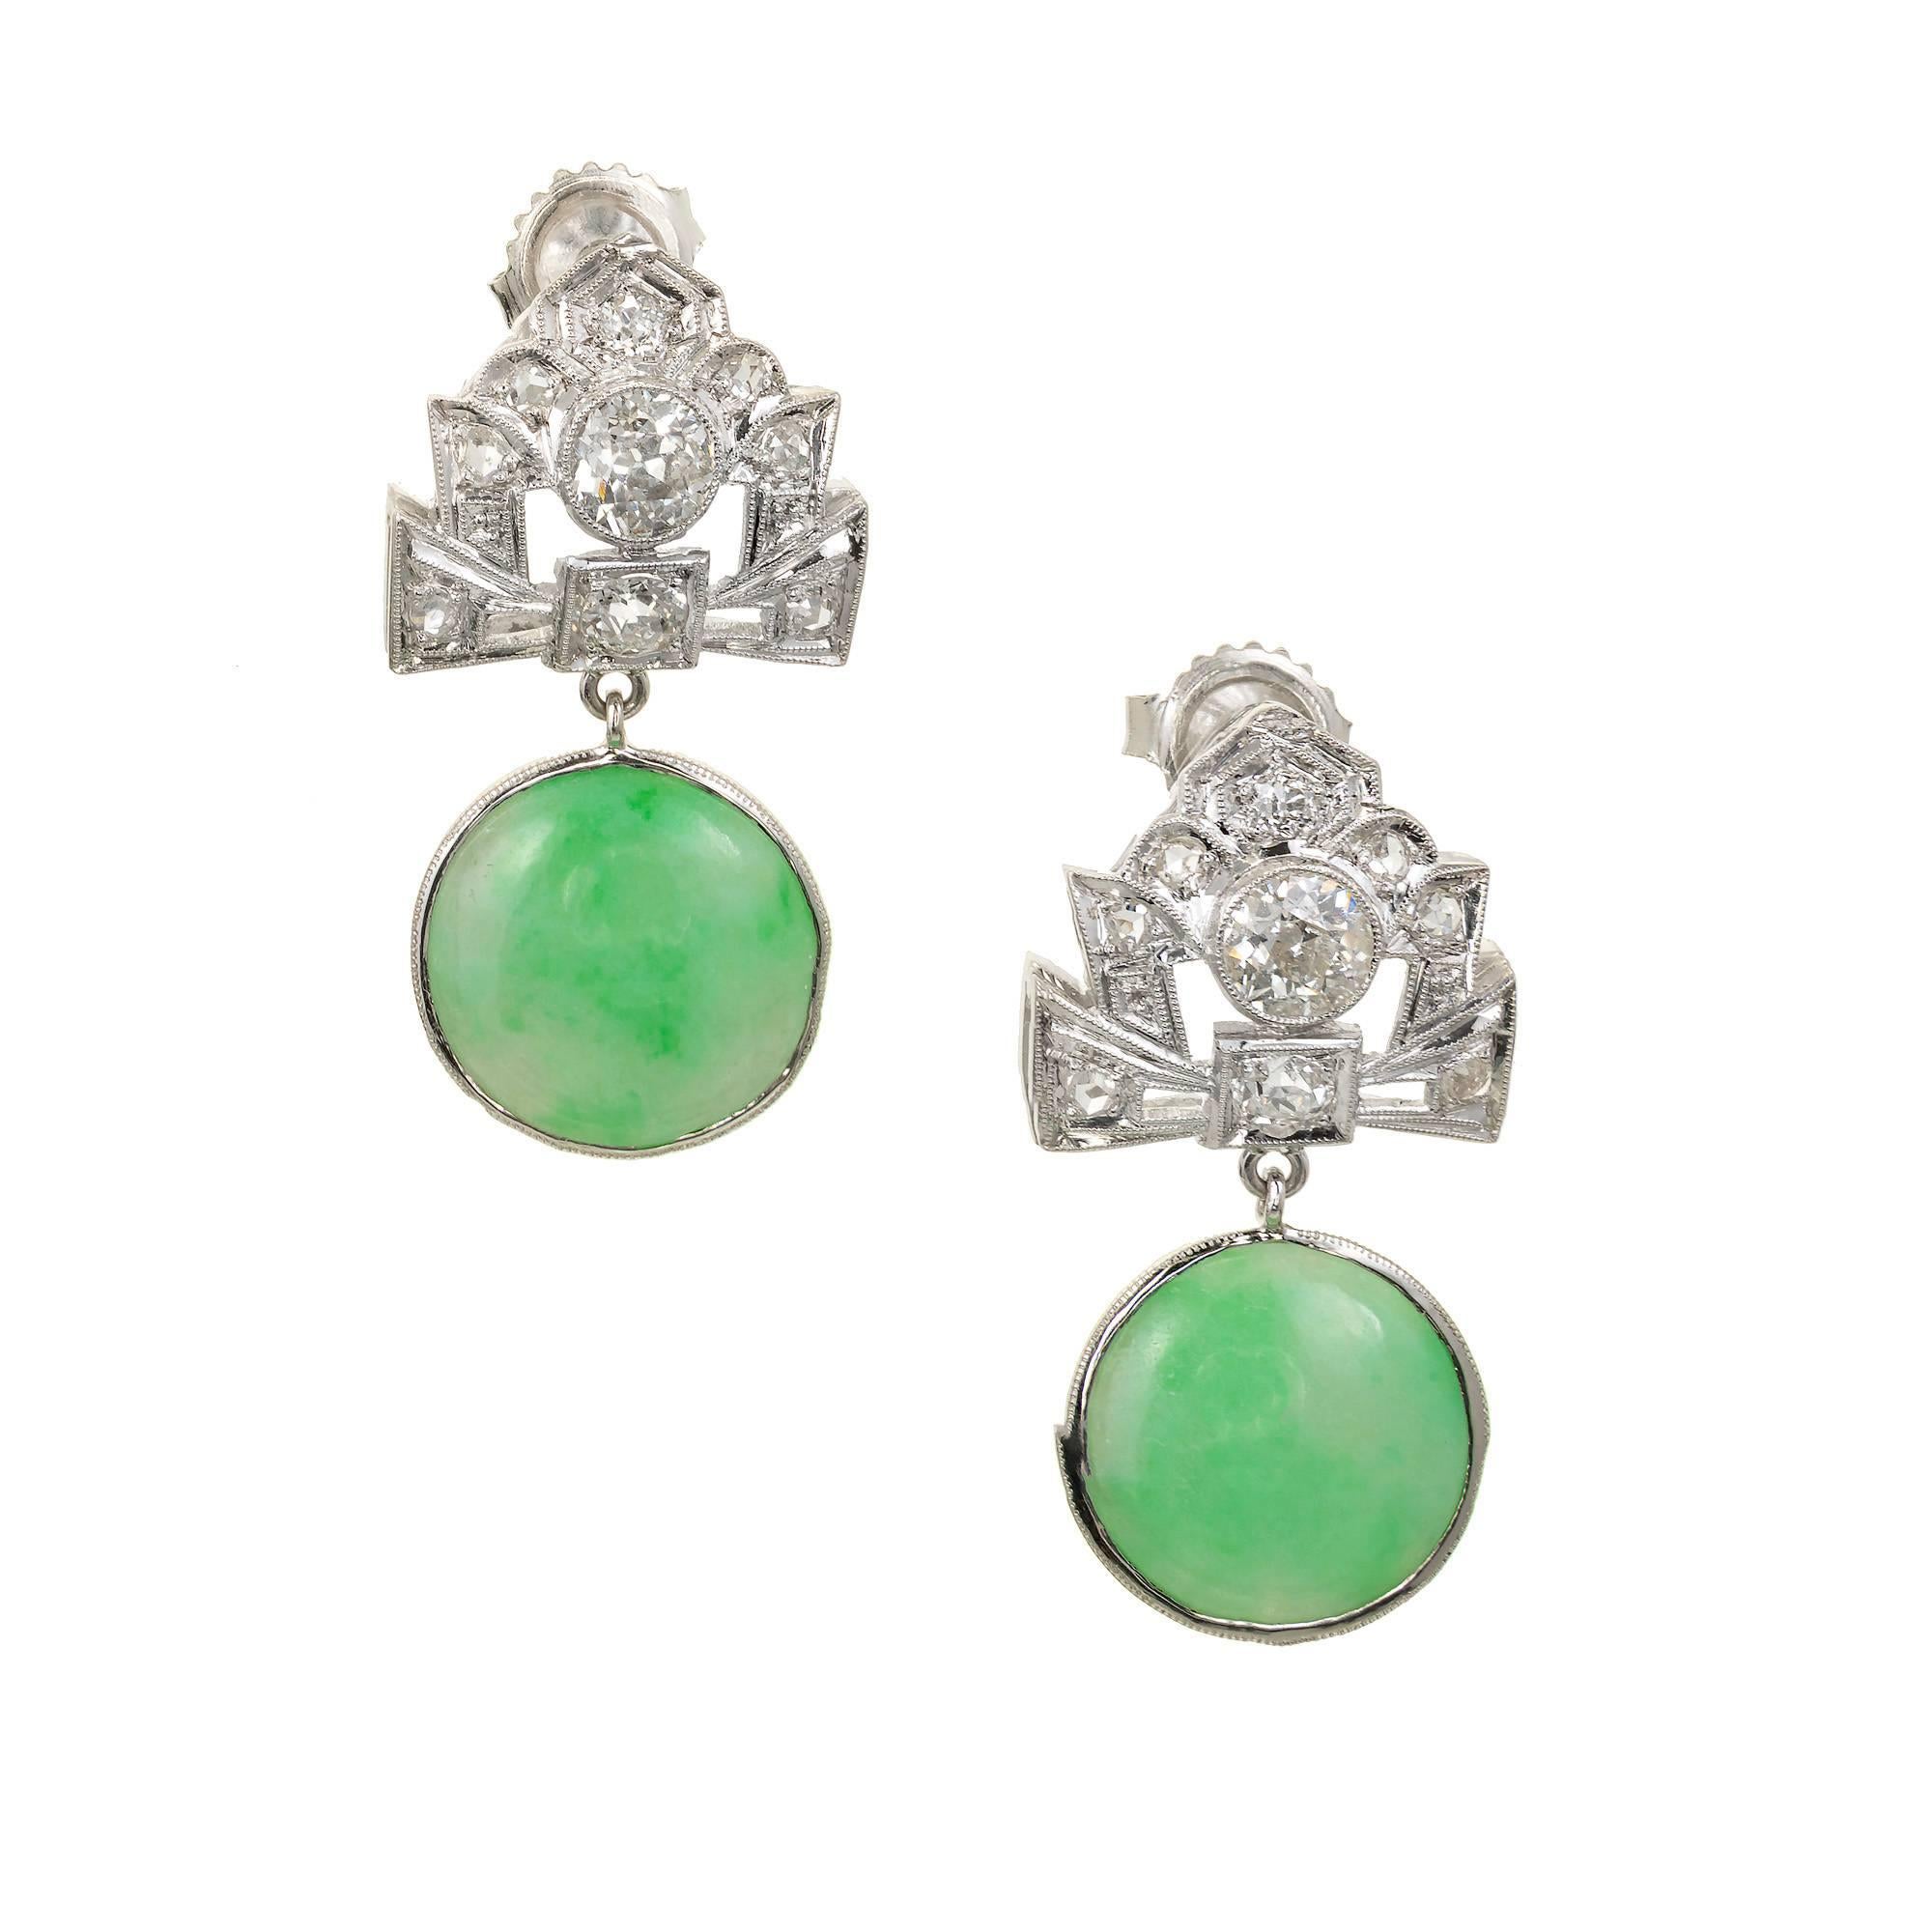 Original jade and diamond Art Deco dangle earrings circa 1920s with round natural Jadeite Jade dangles over 5.00cts each. Both GIA certified natural and untreated. The tops are handmade in Platinum with an Art Deco bow design and bright old cut